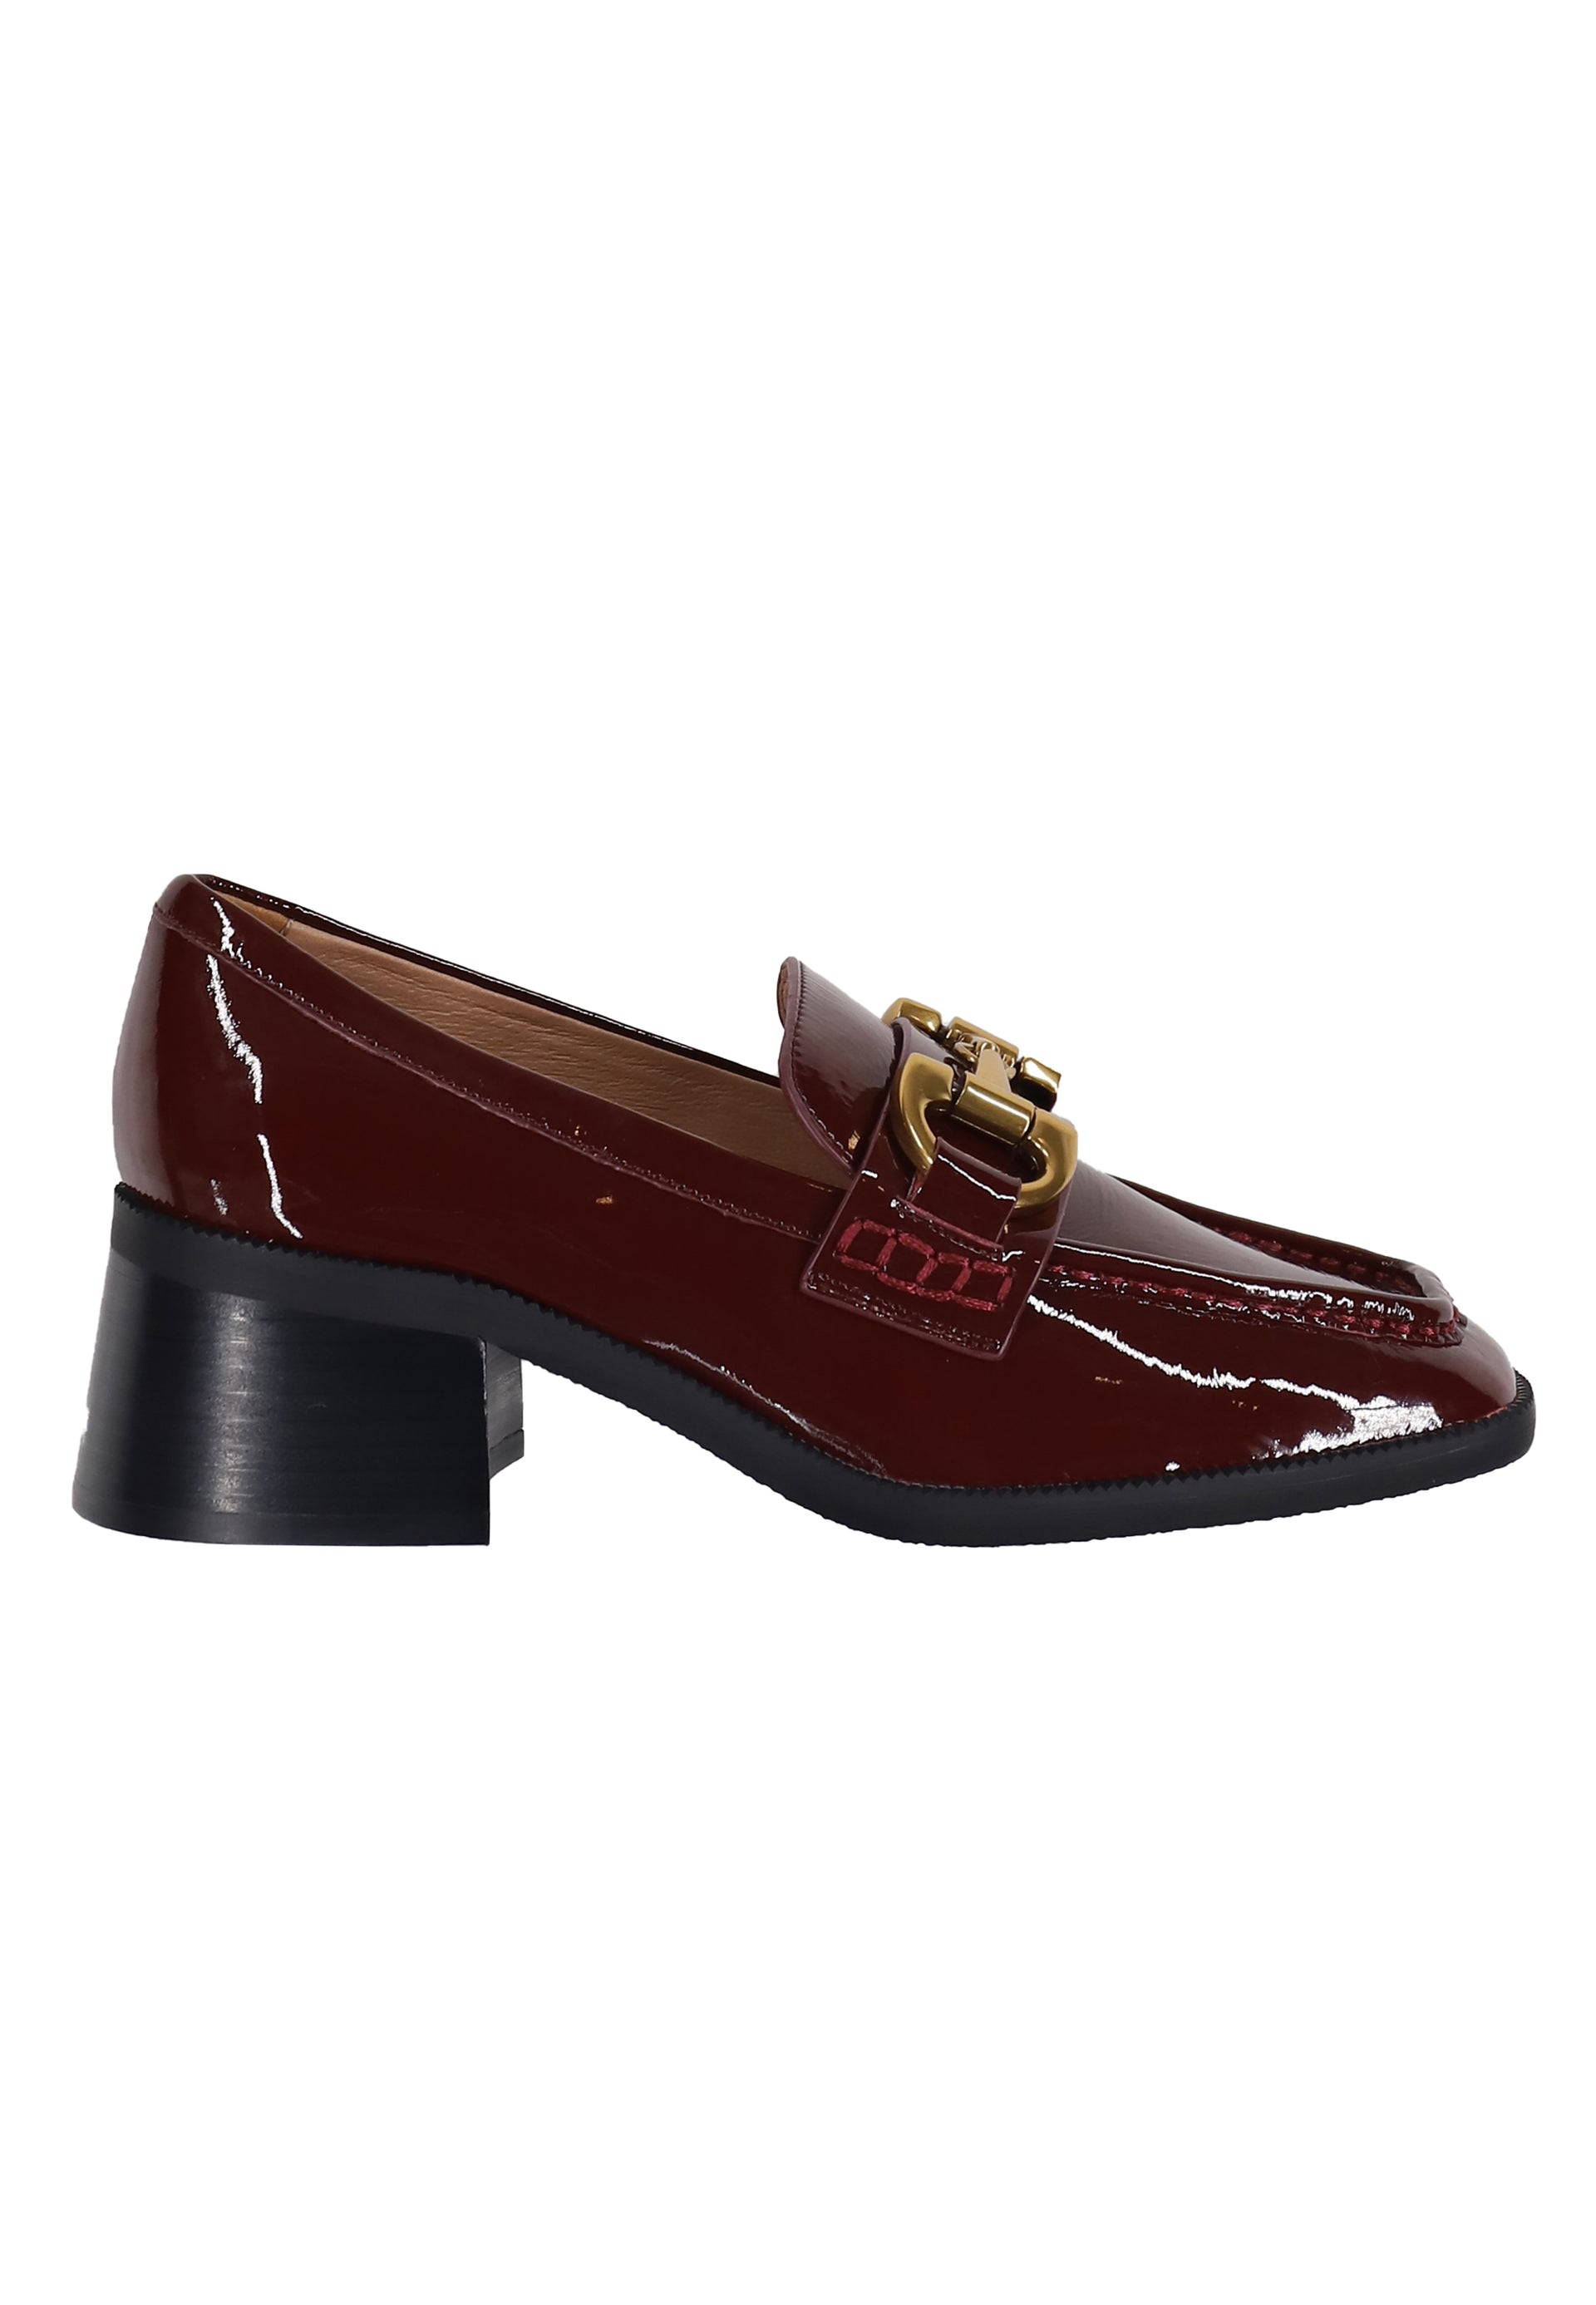 Women's moccasins in shiny burgundy leather with gold horsebit Tiana